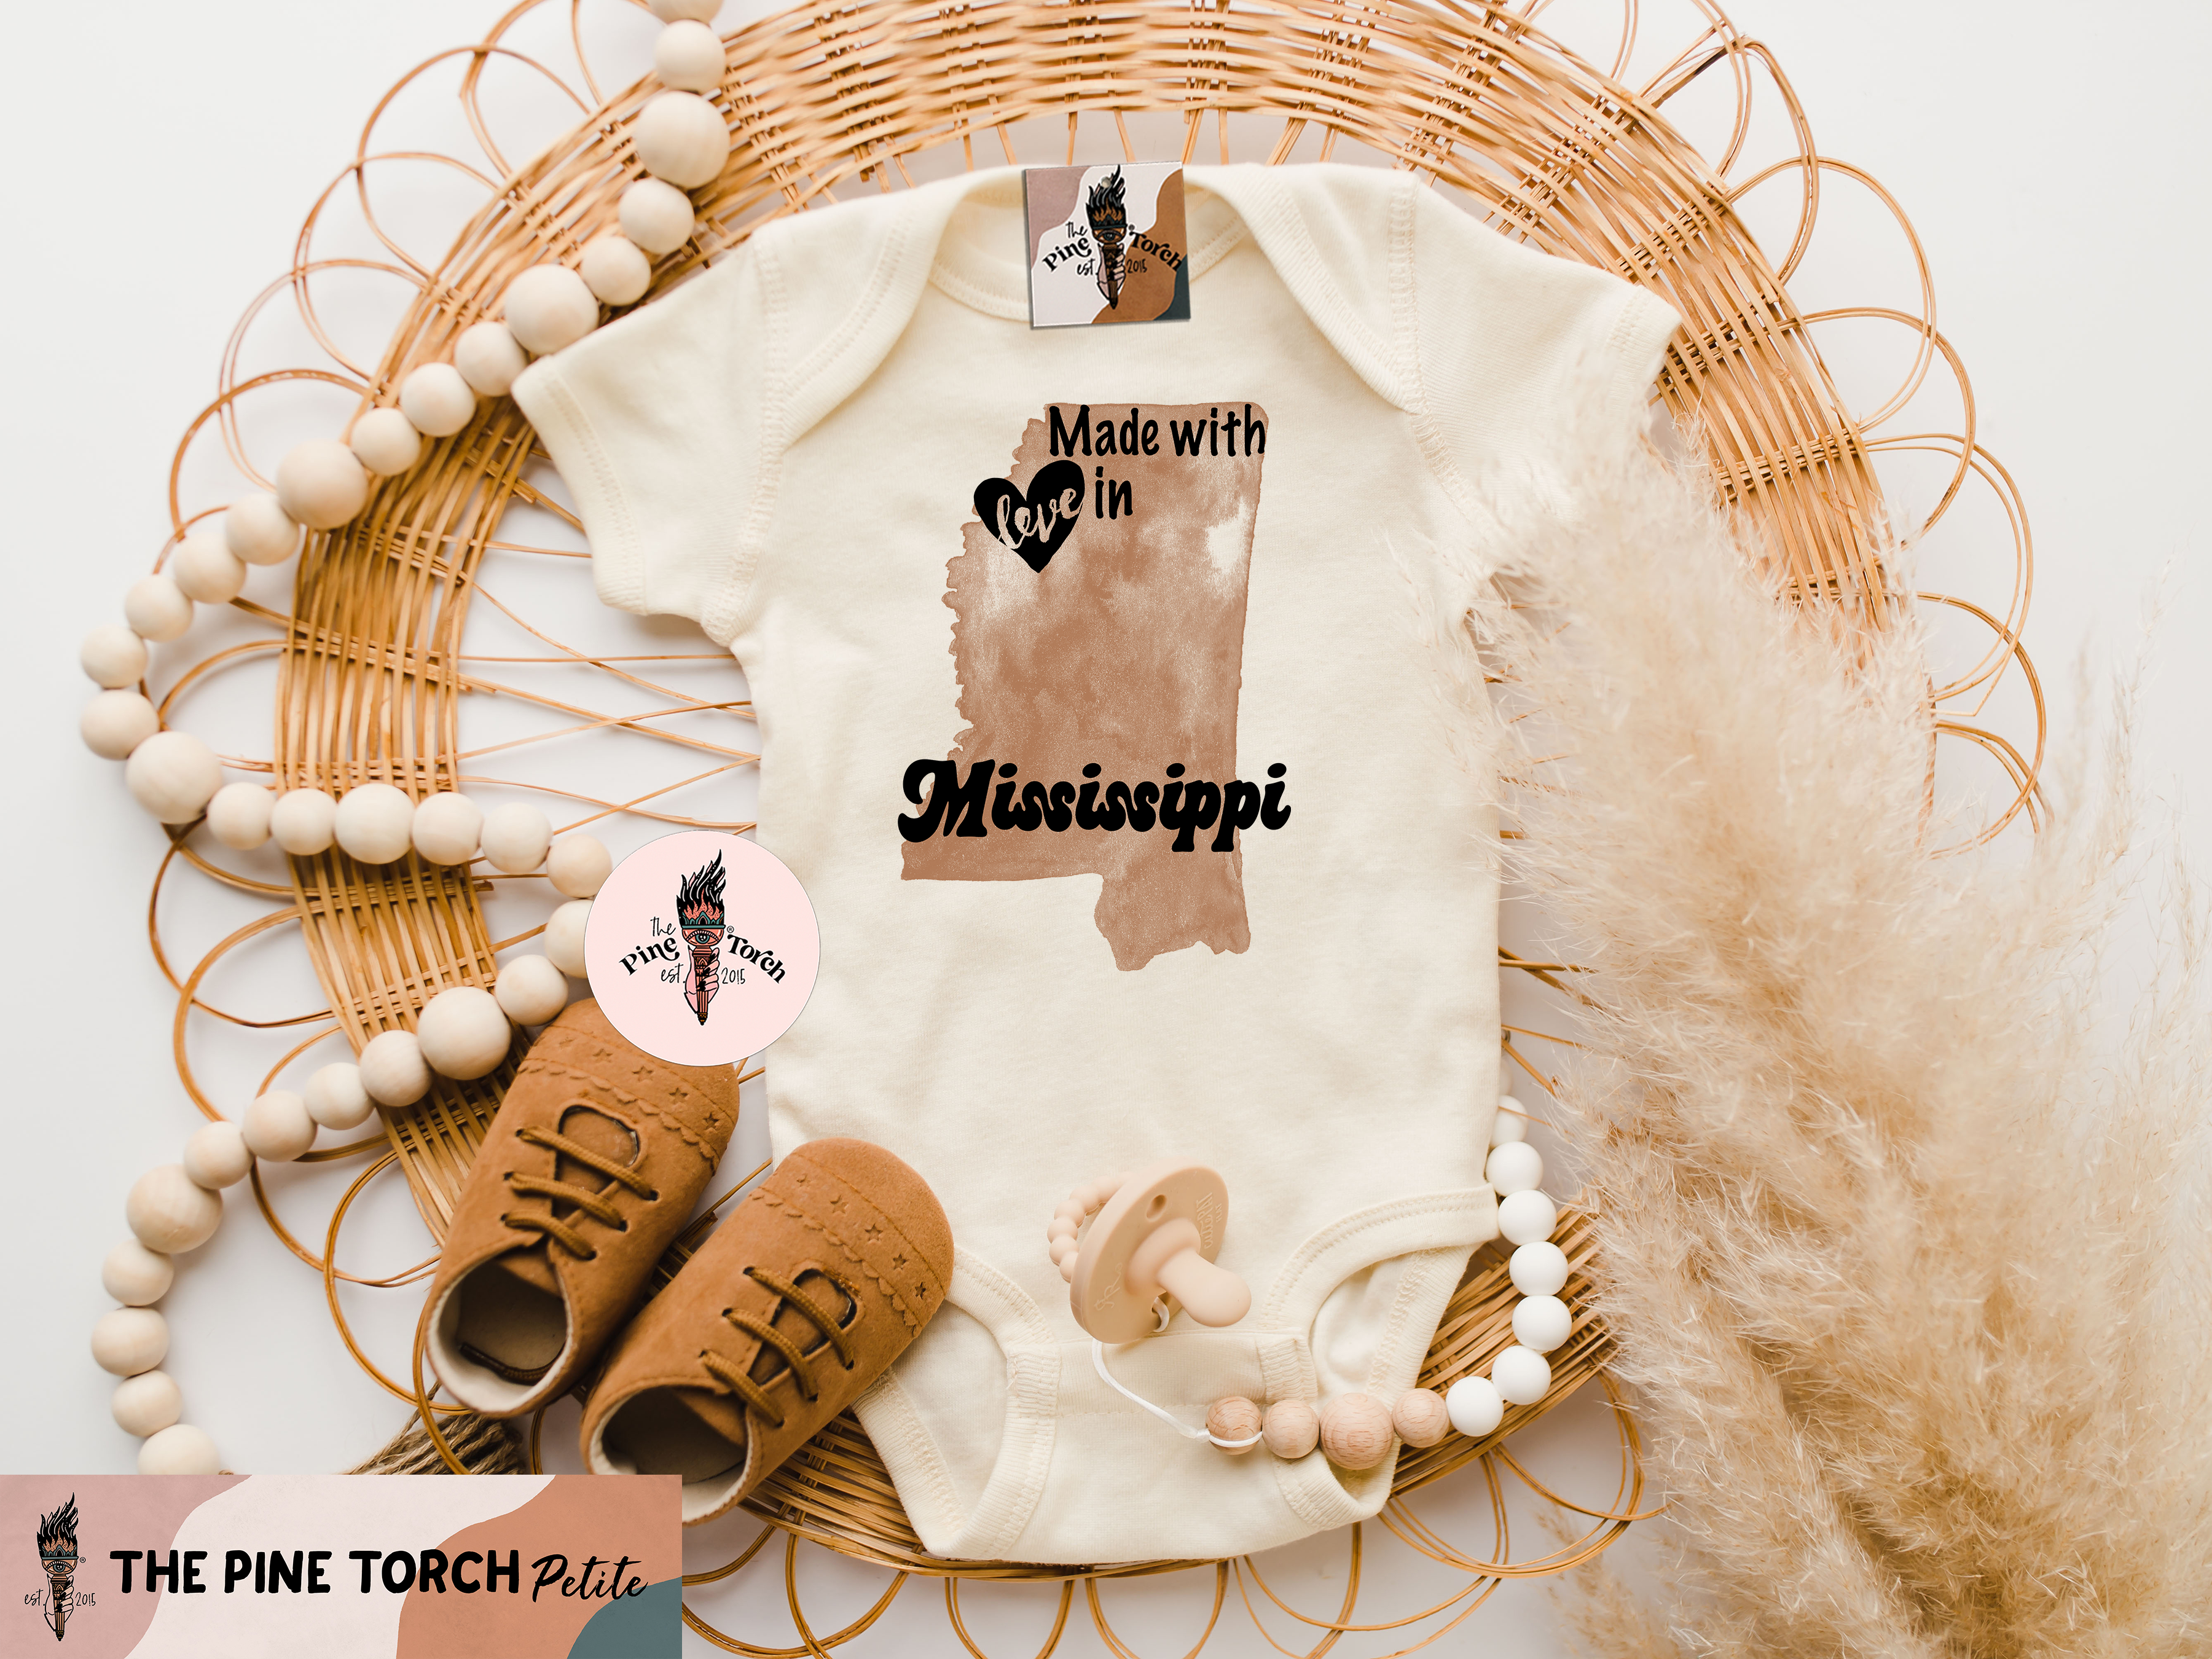 « MADE WITH LOVE IN MISSISSIPPI » BODYSUIT